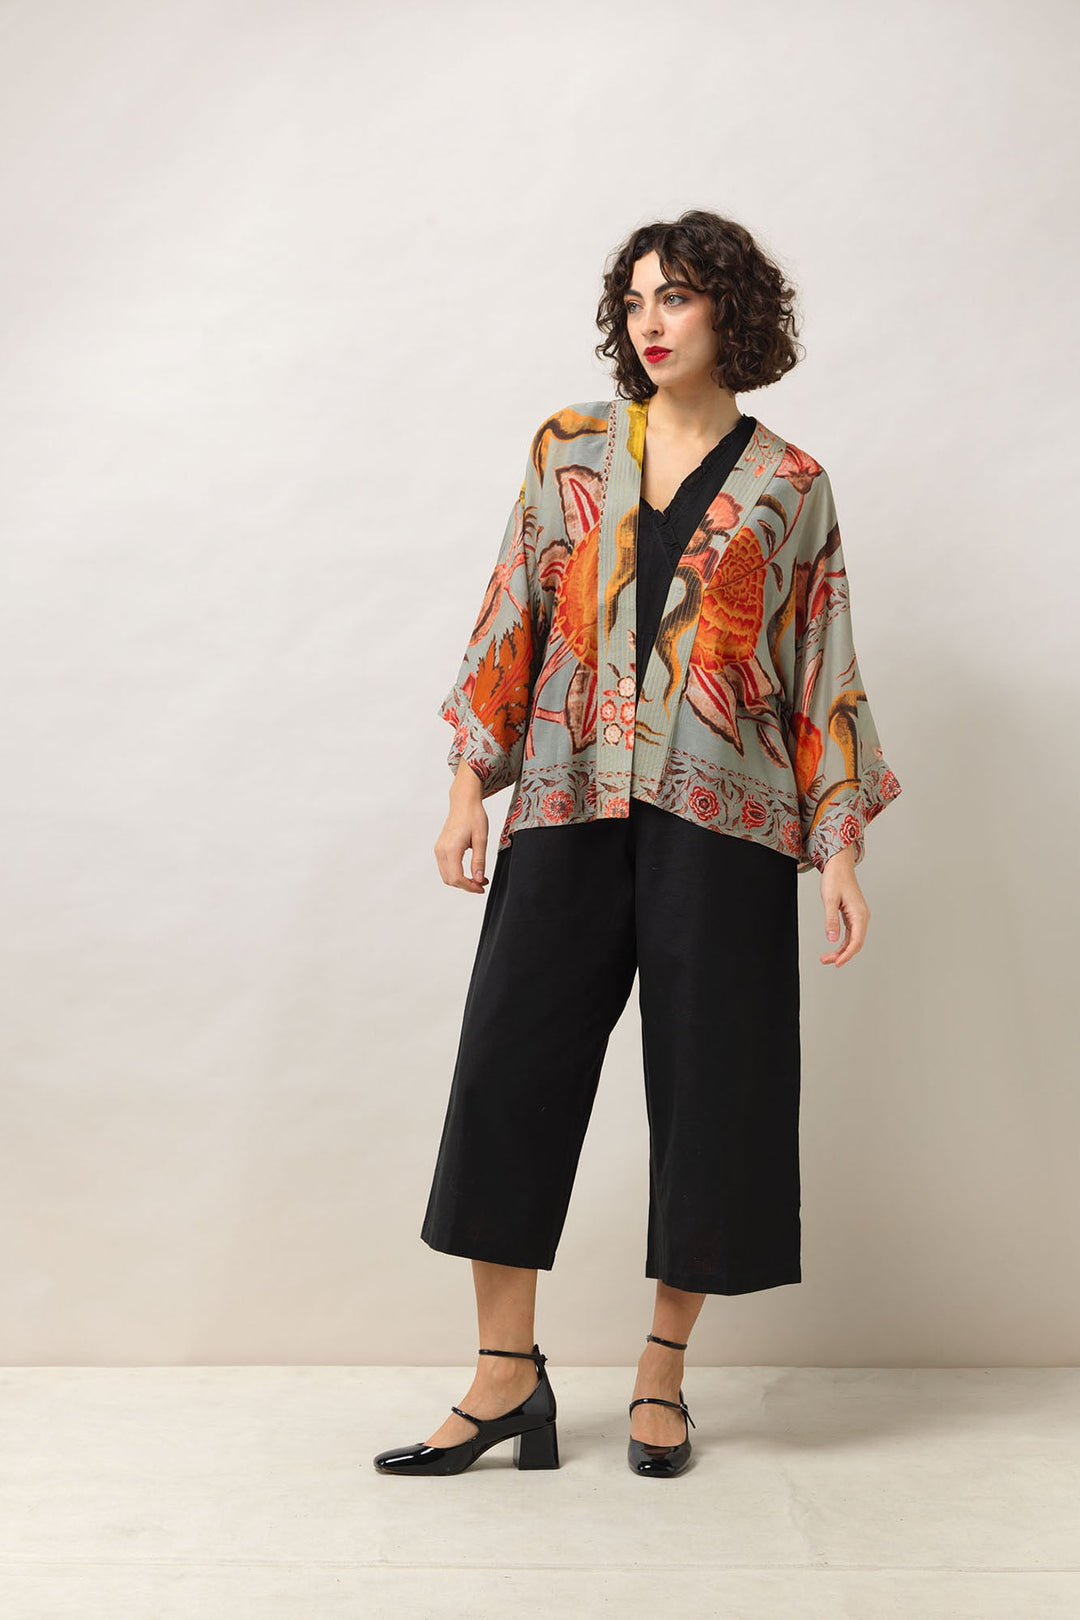 Women's short kimono in green with floral joy print by One Hundred Stars